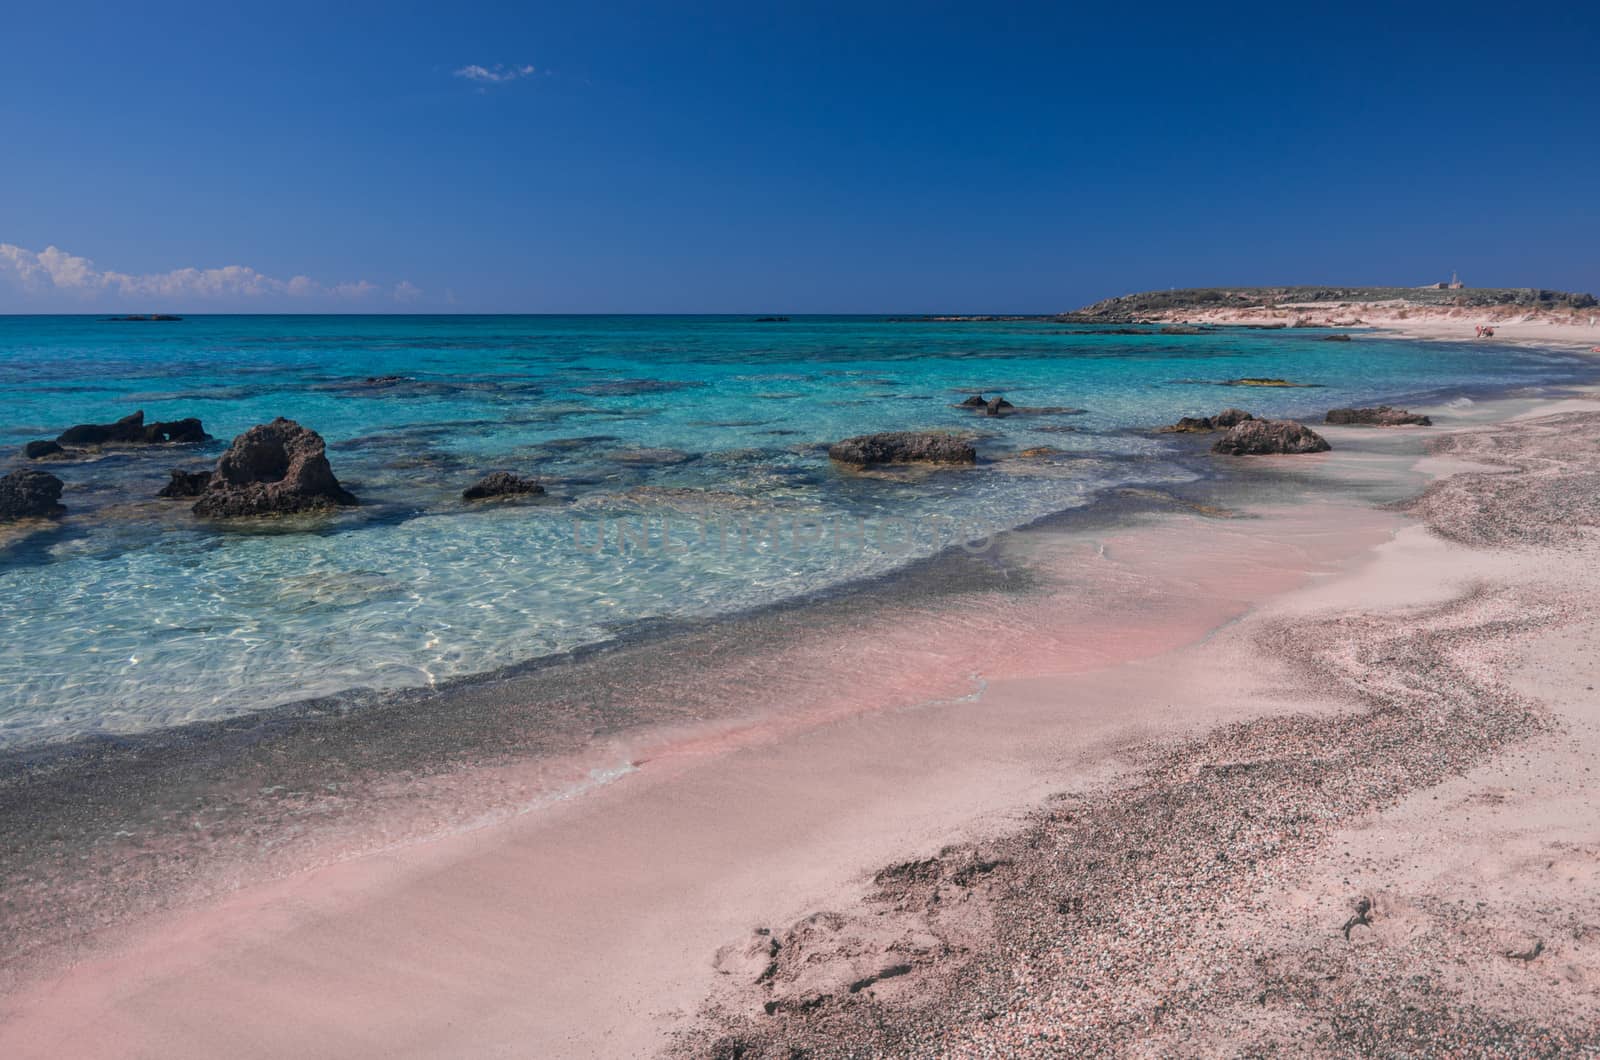 Beaches in Elafonisi, Crete island. have the particularity to be colored pink because of the coral fragments accumulated on the shore